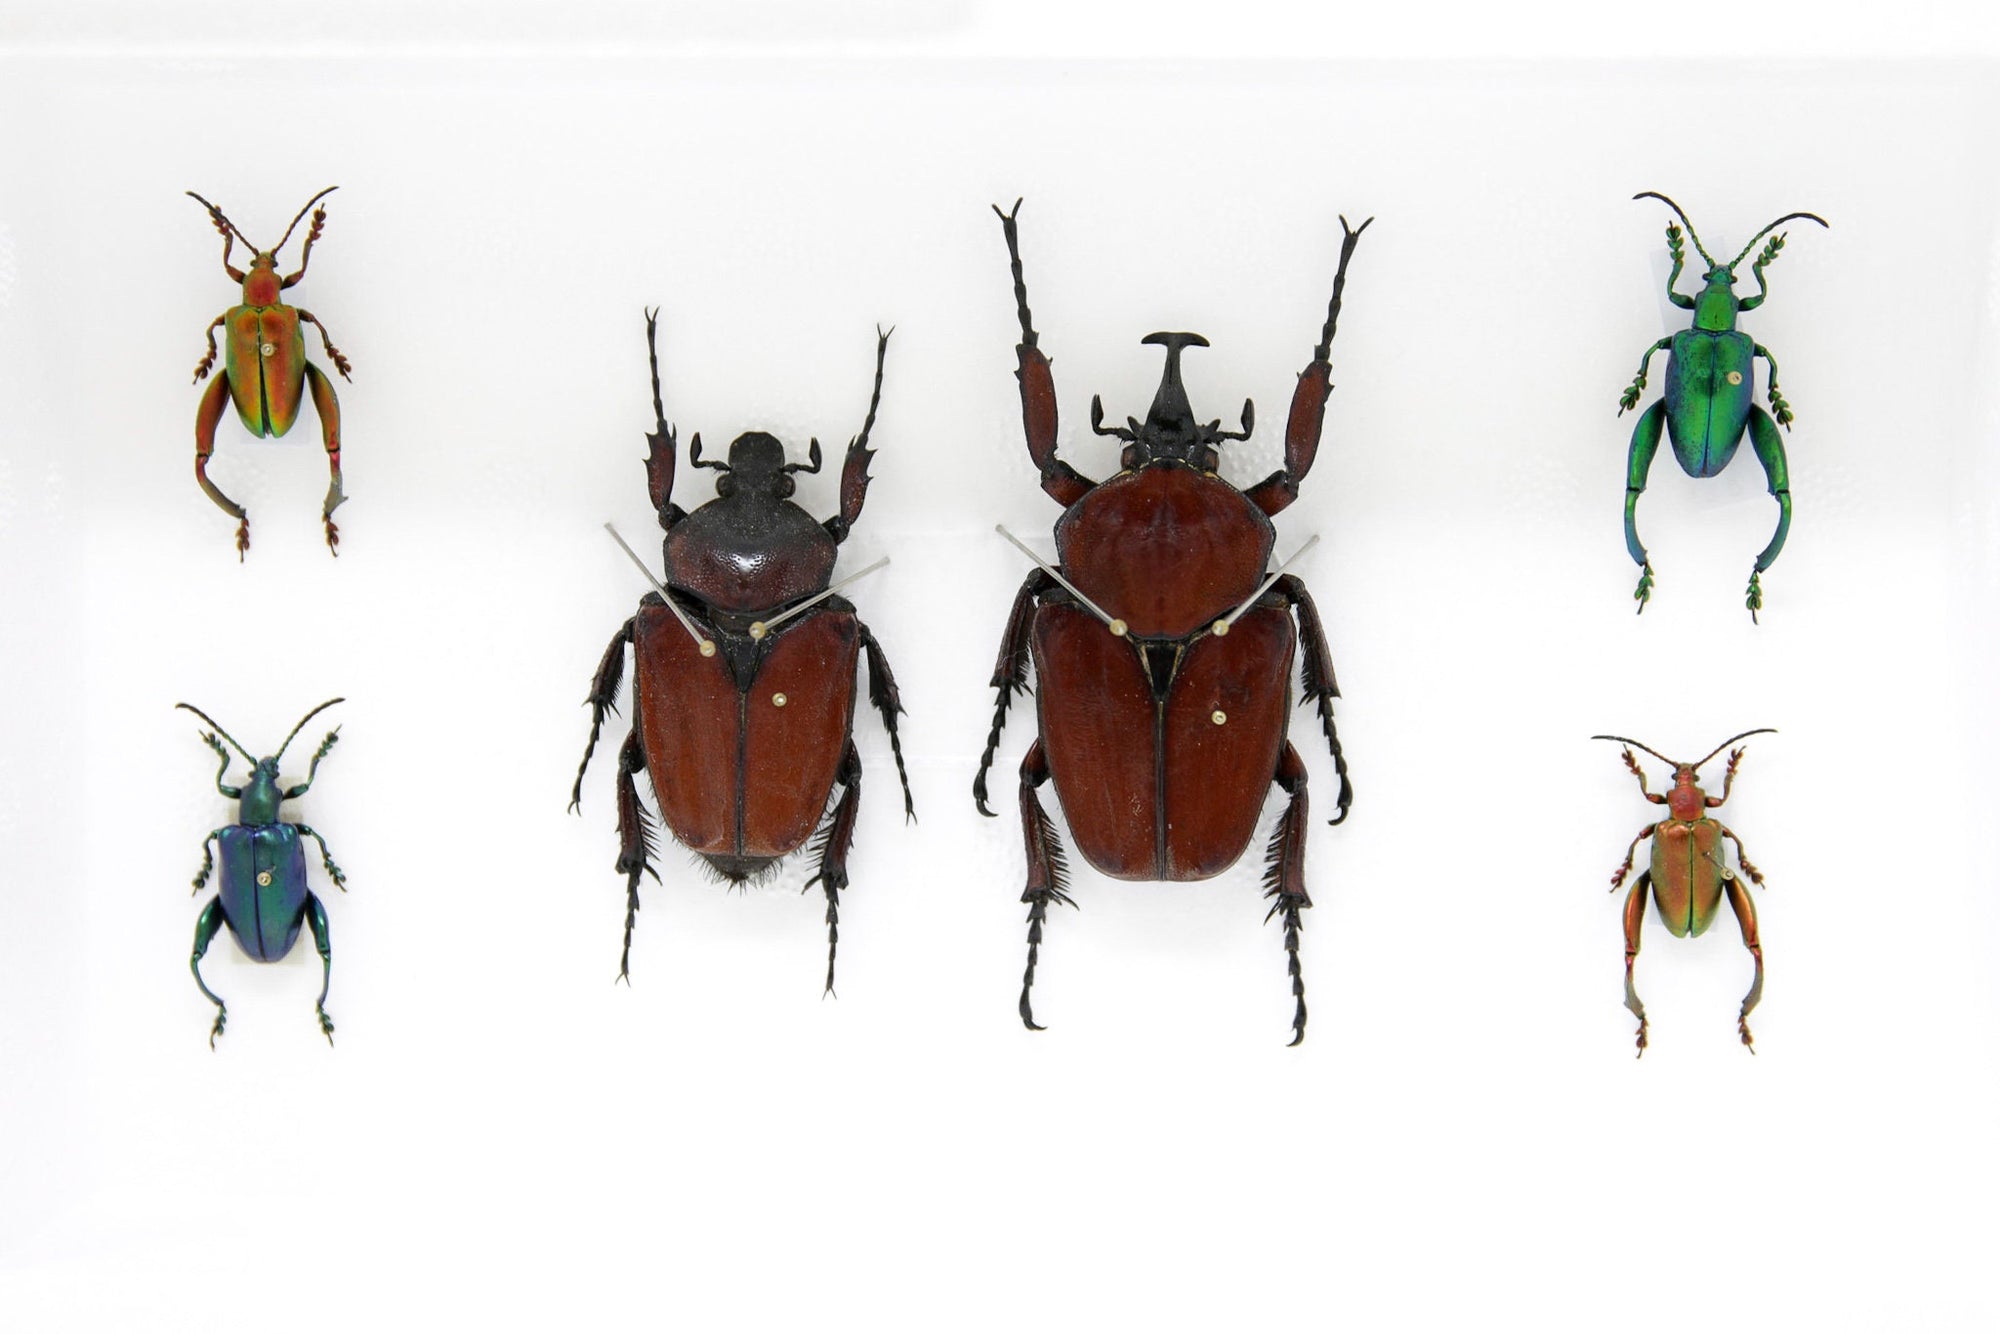 Pair of African Flower Beetles (Fornasinius russus) and Sagra Beetles, A1 Quality, Entomology, Real Taxidermy Specimens #SE66